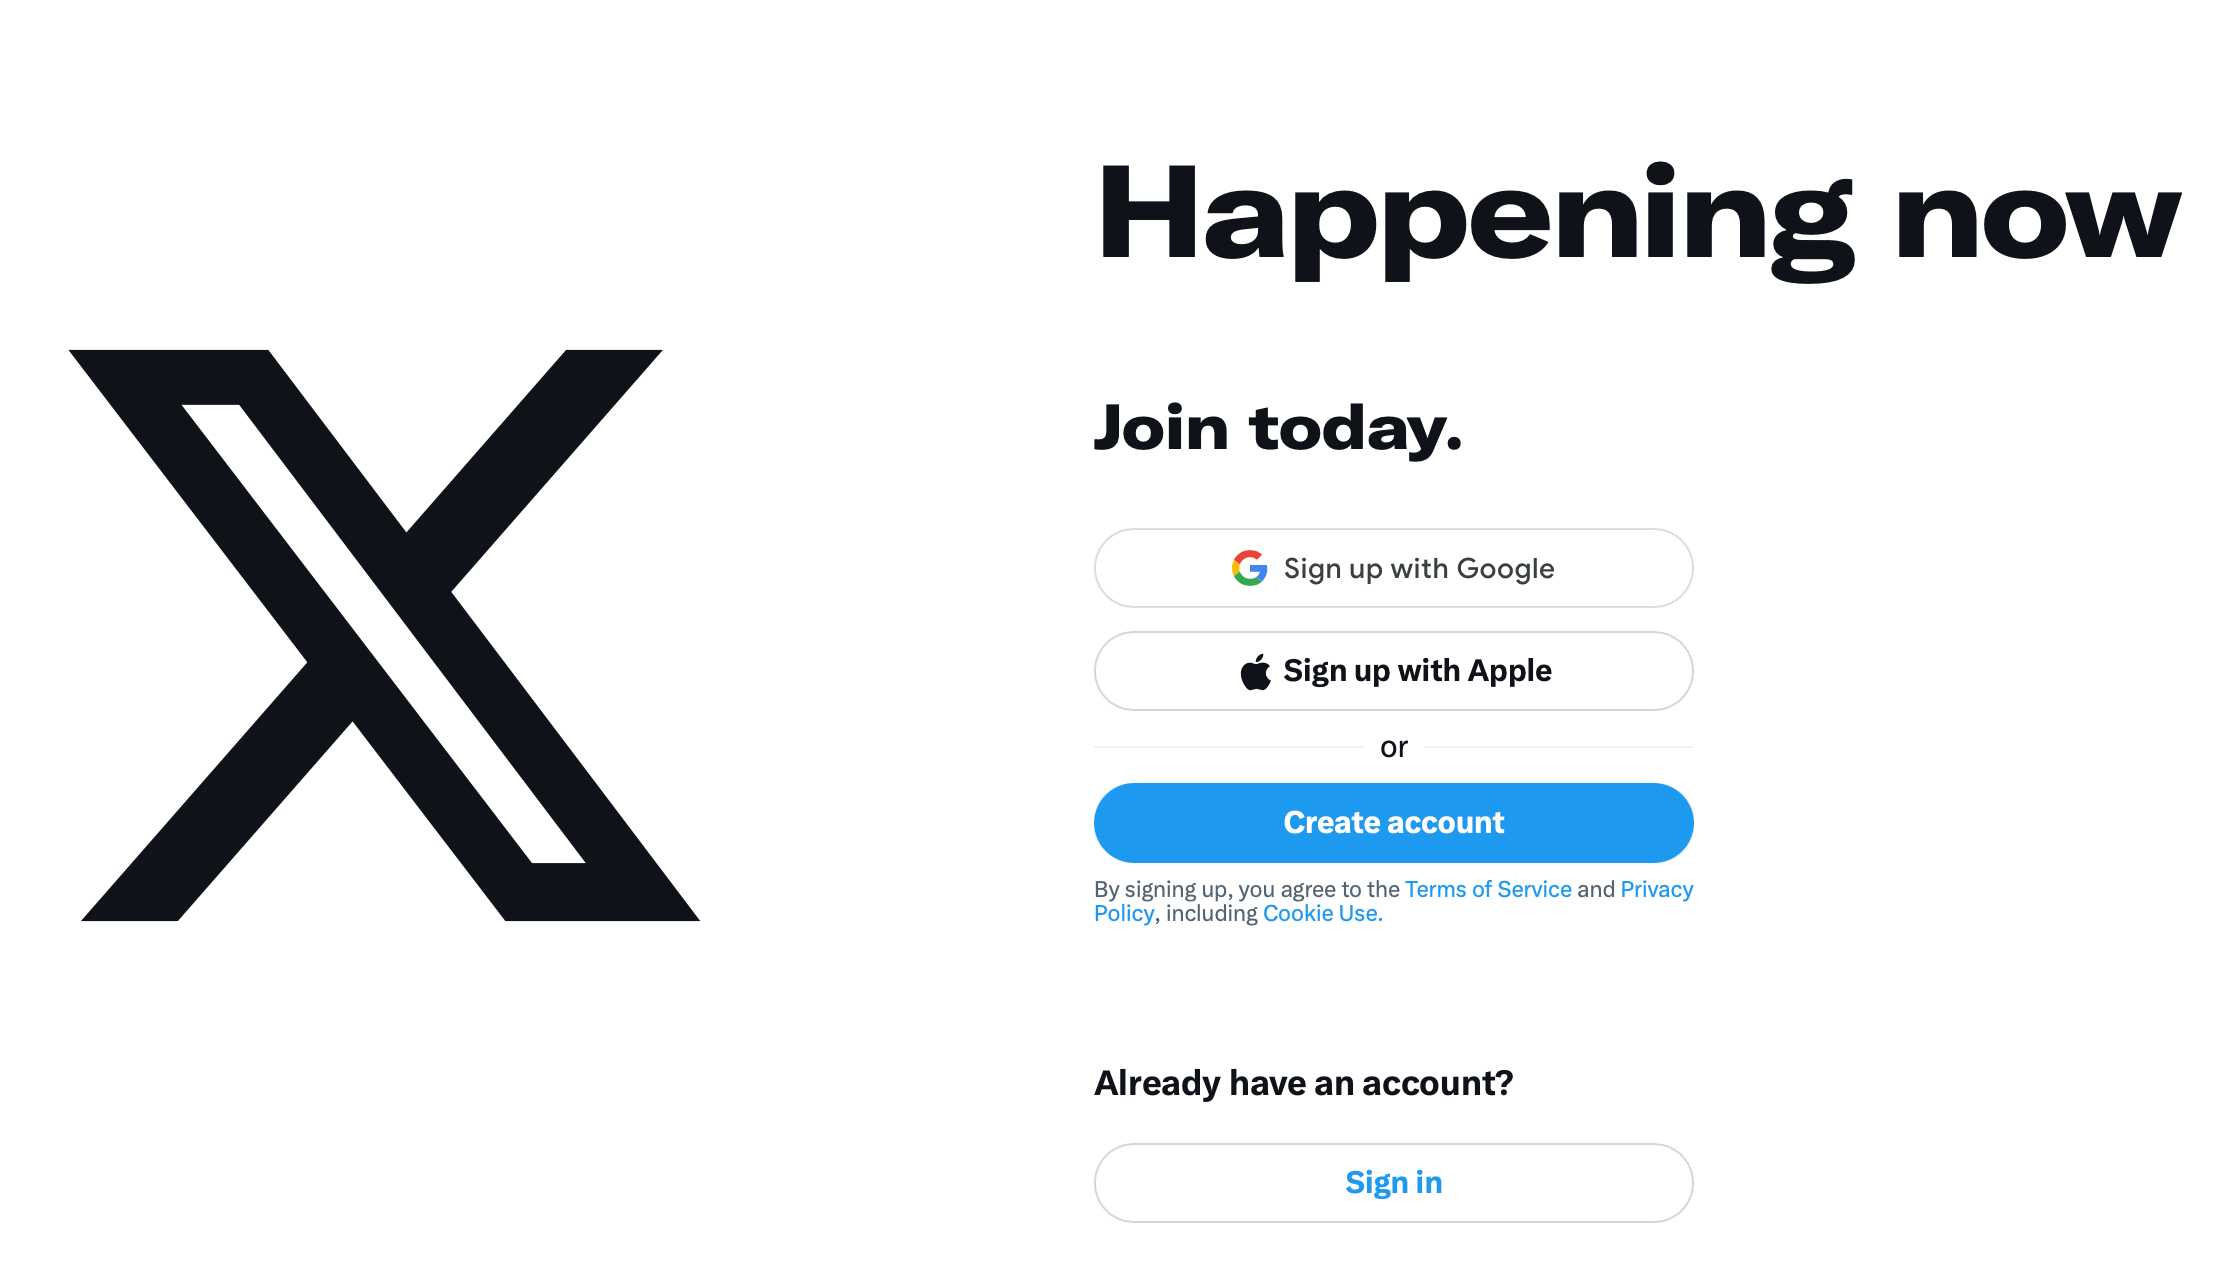 X (Twitter) Adopts New Business Model